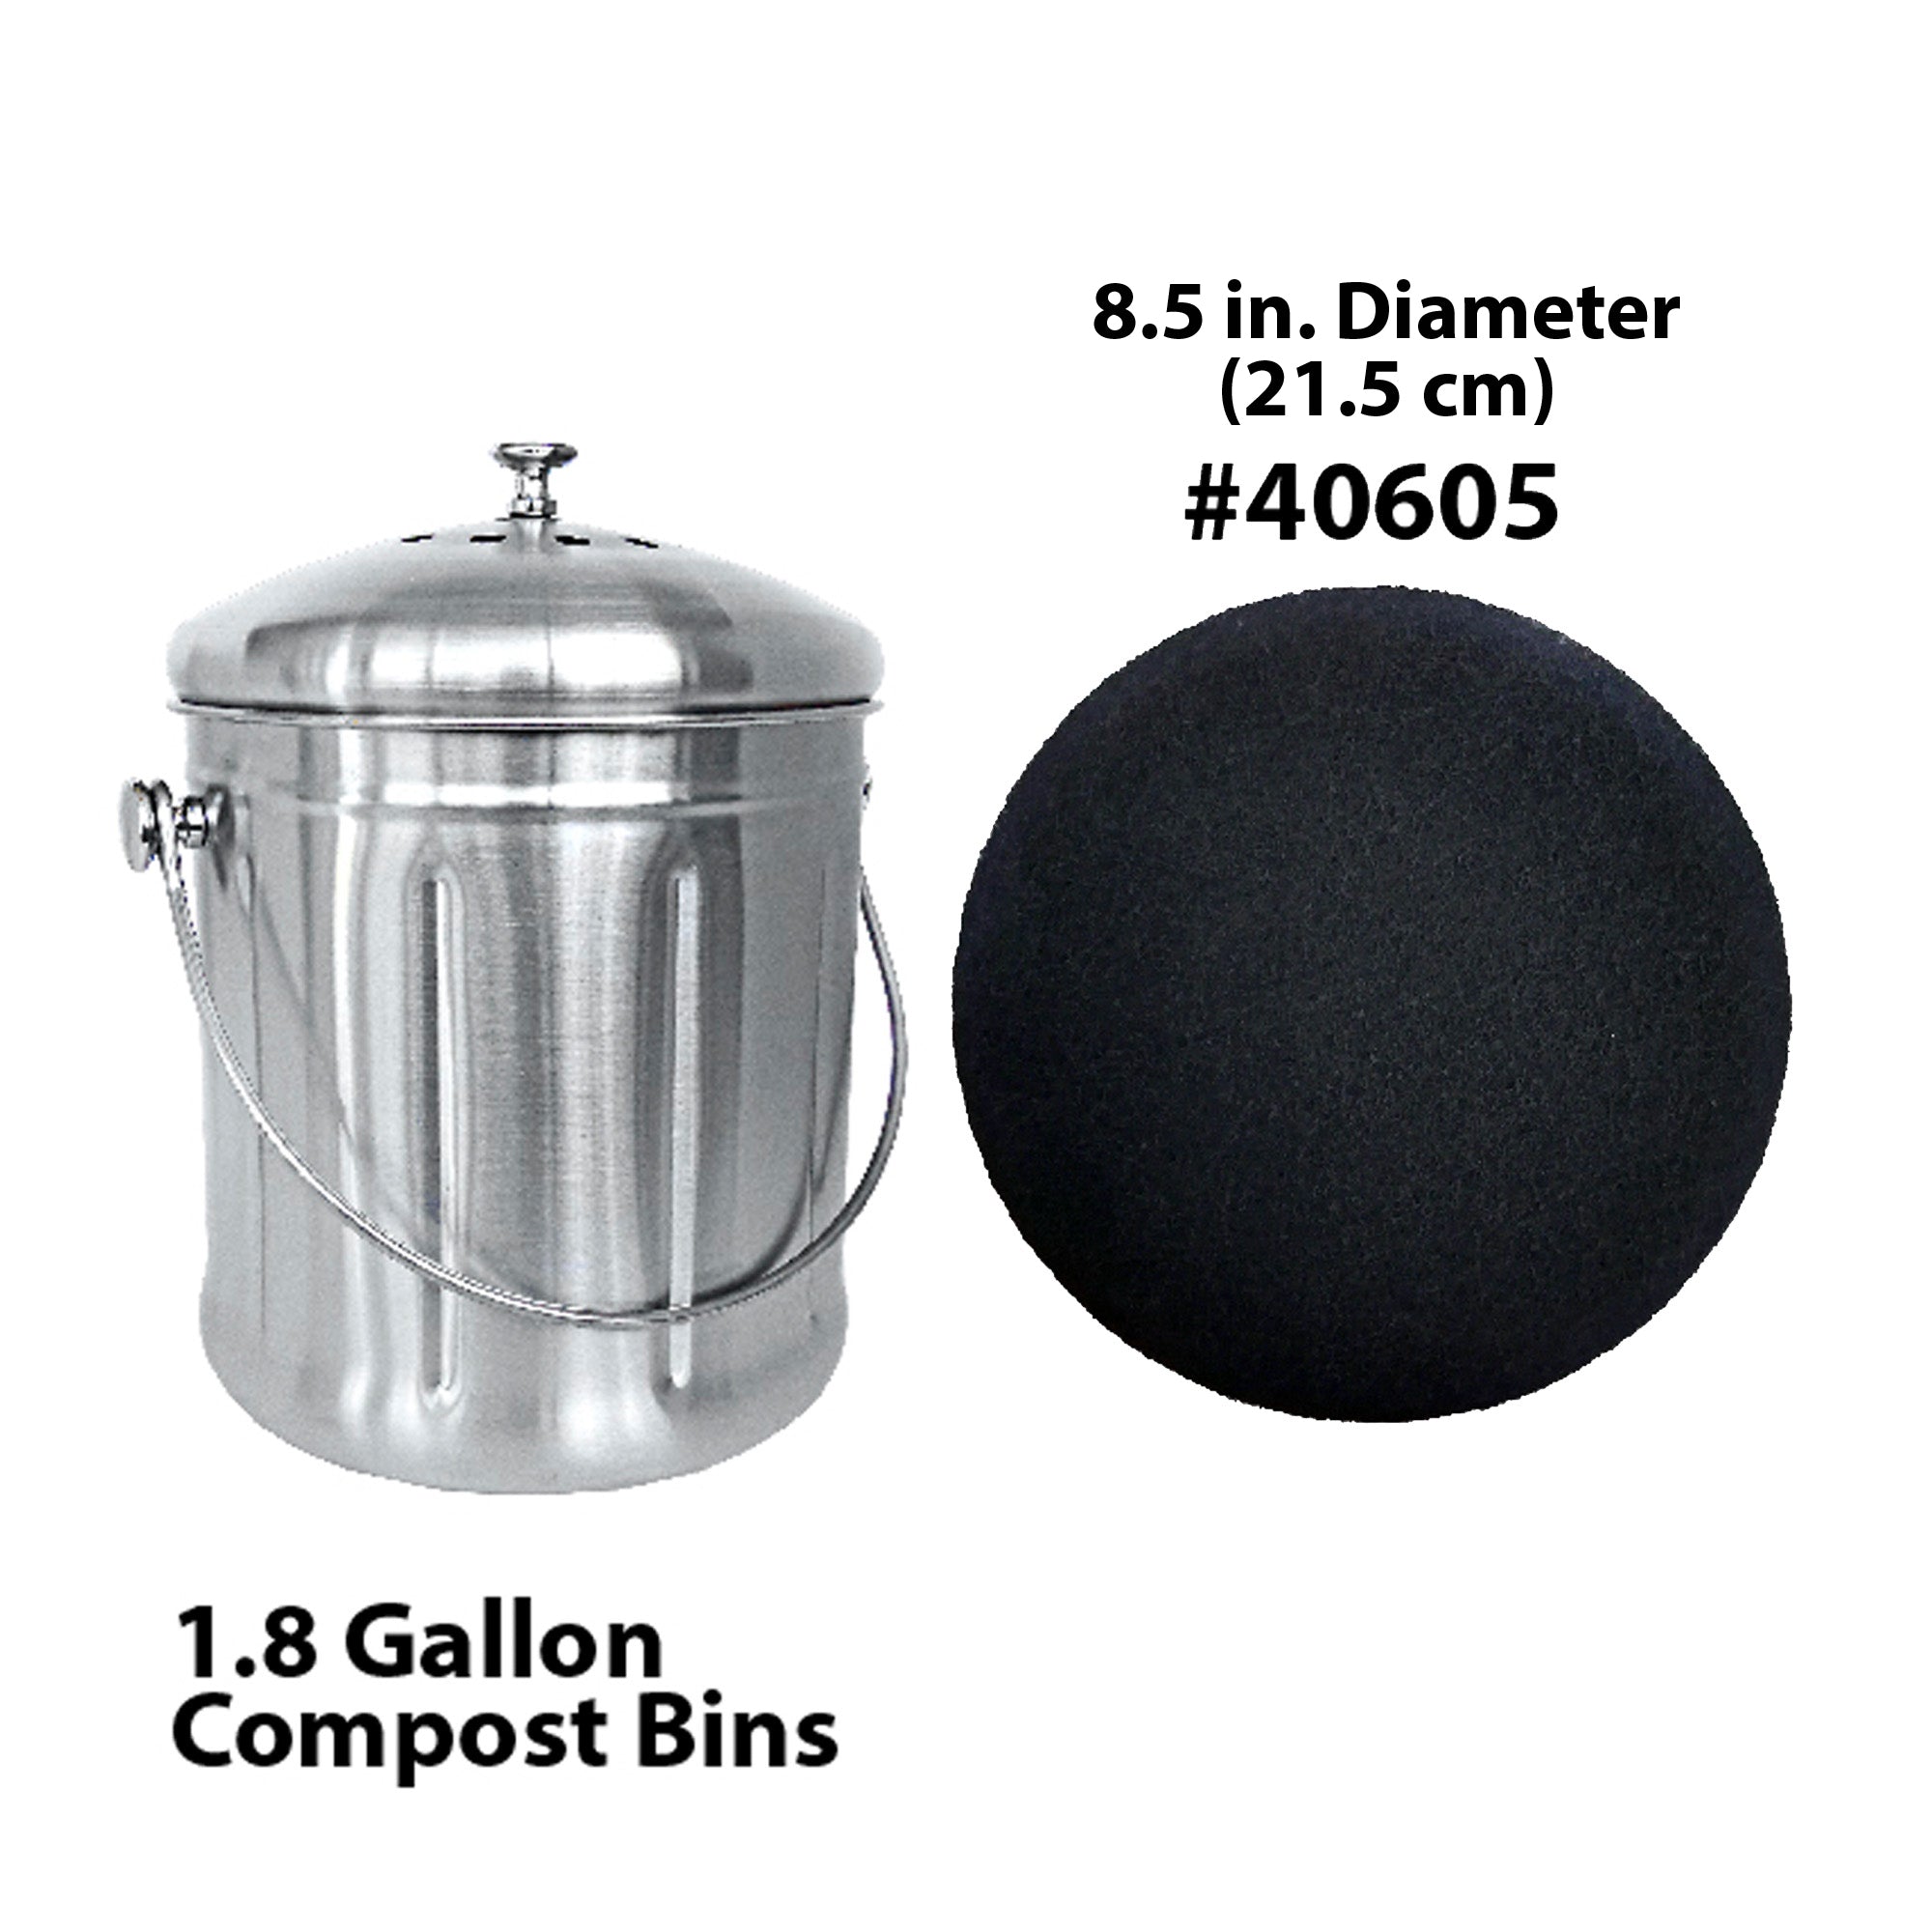 Lucky Family Green Countertop Compost Bin with Lid - 1.6 Gal